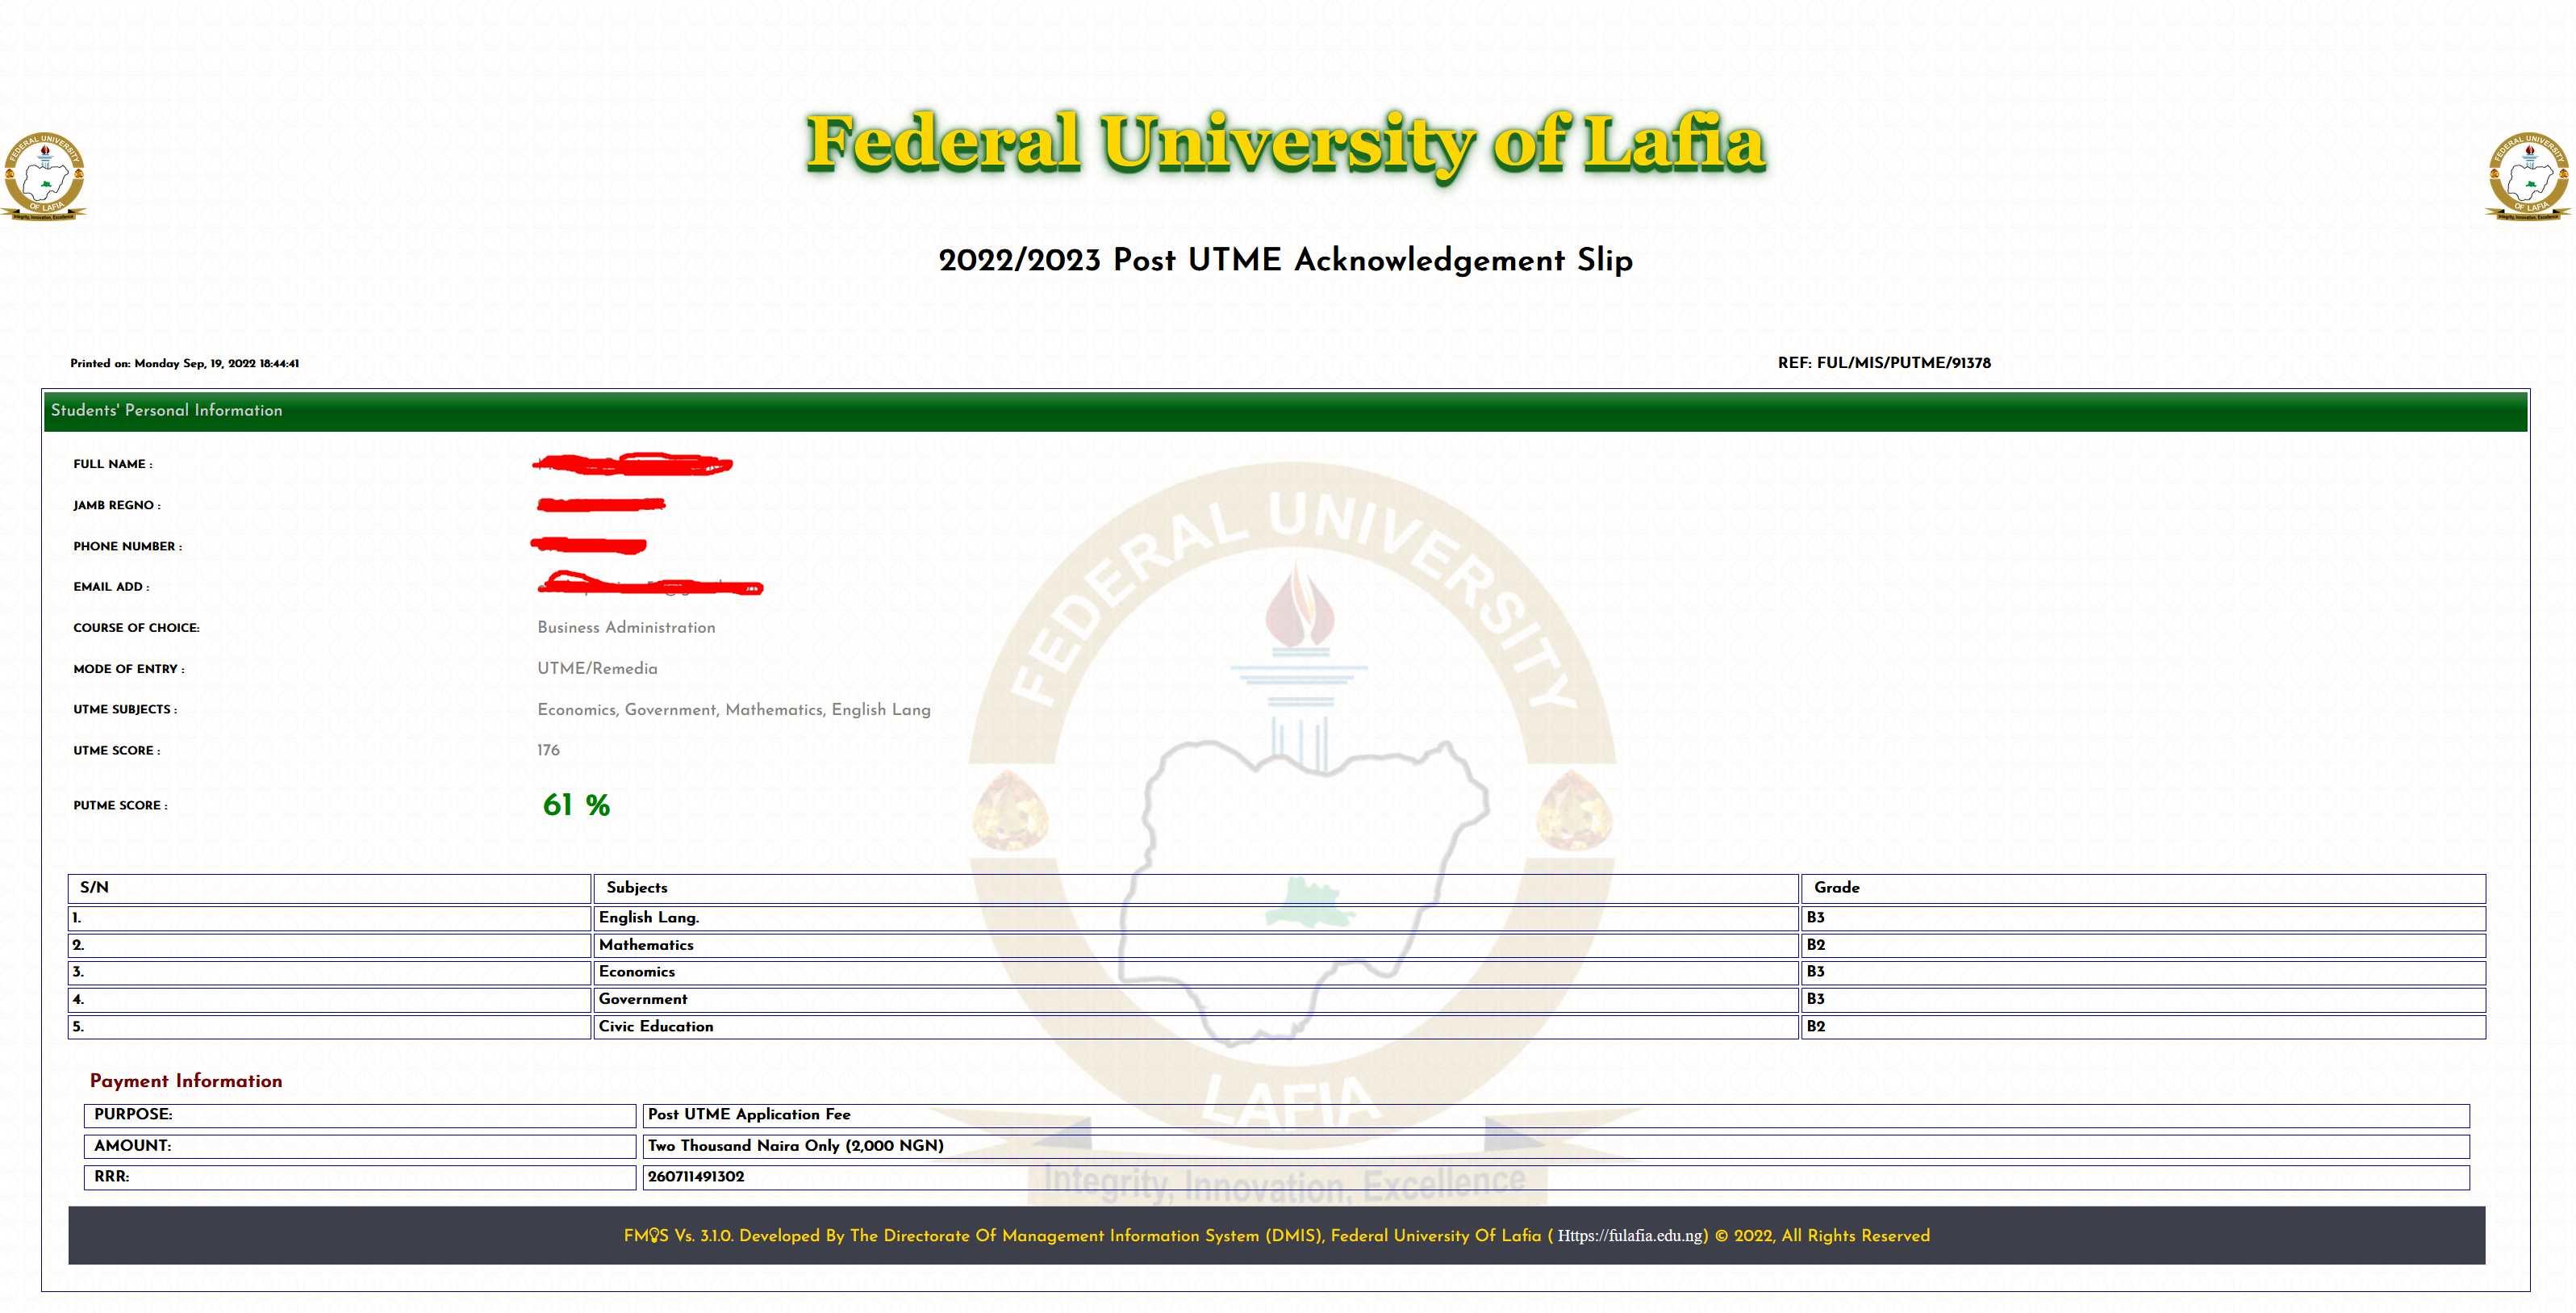 FULAFIA Post-UTME Screening Result 2022/2023 is Out